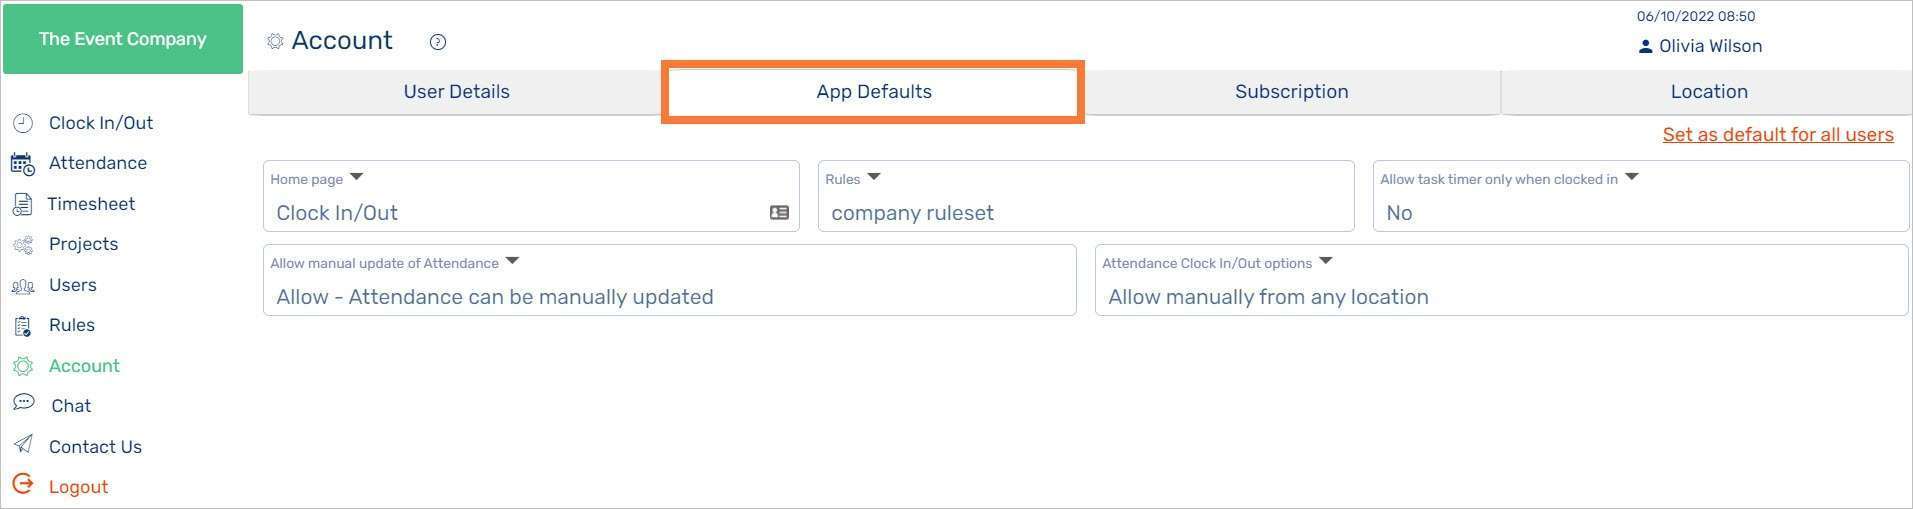 Manage Accounts in Time Tracking App | App Defaults